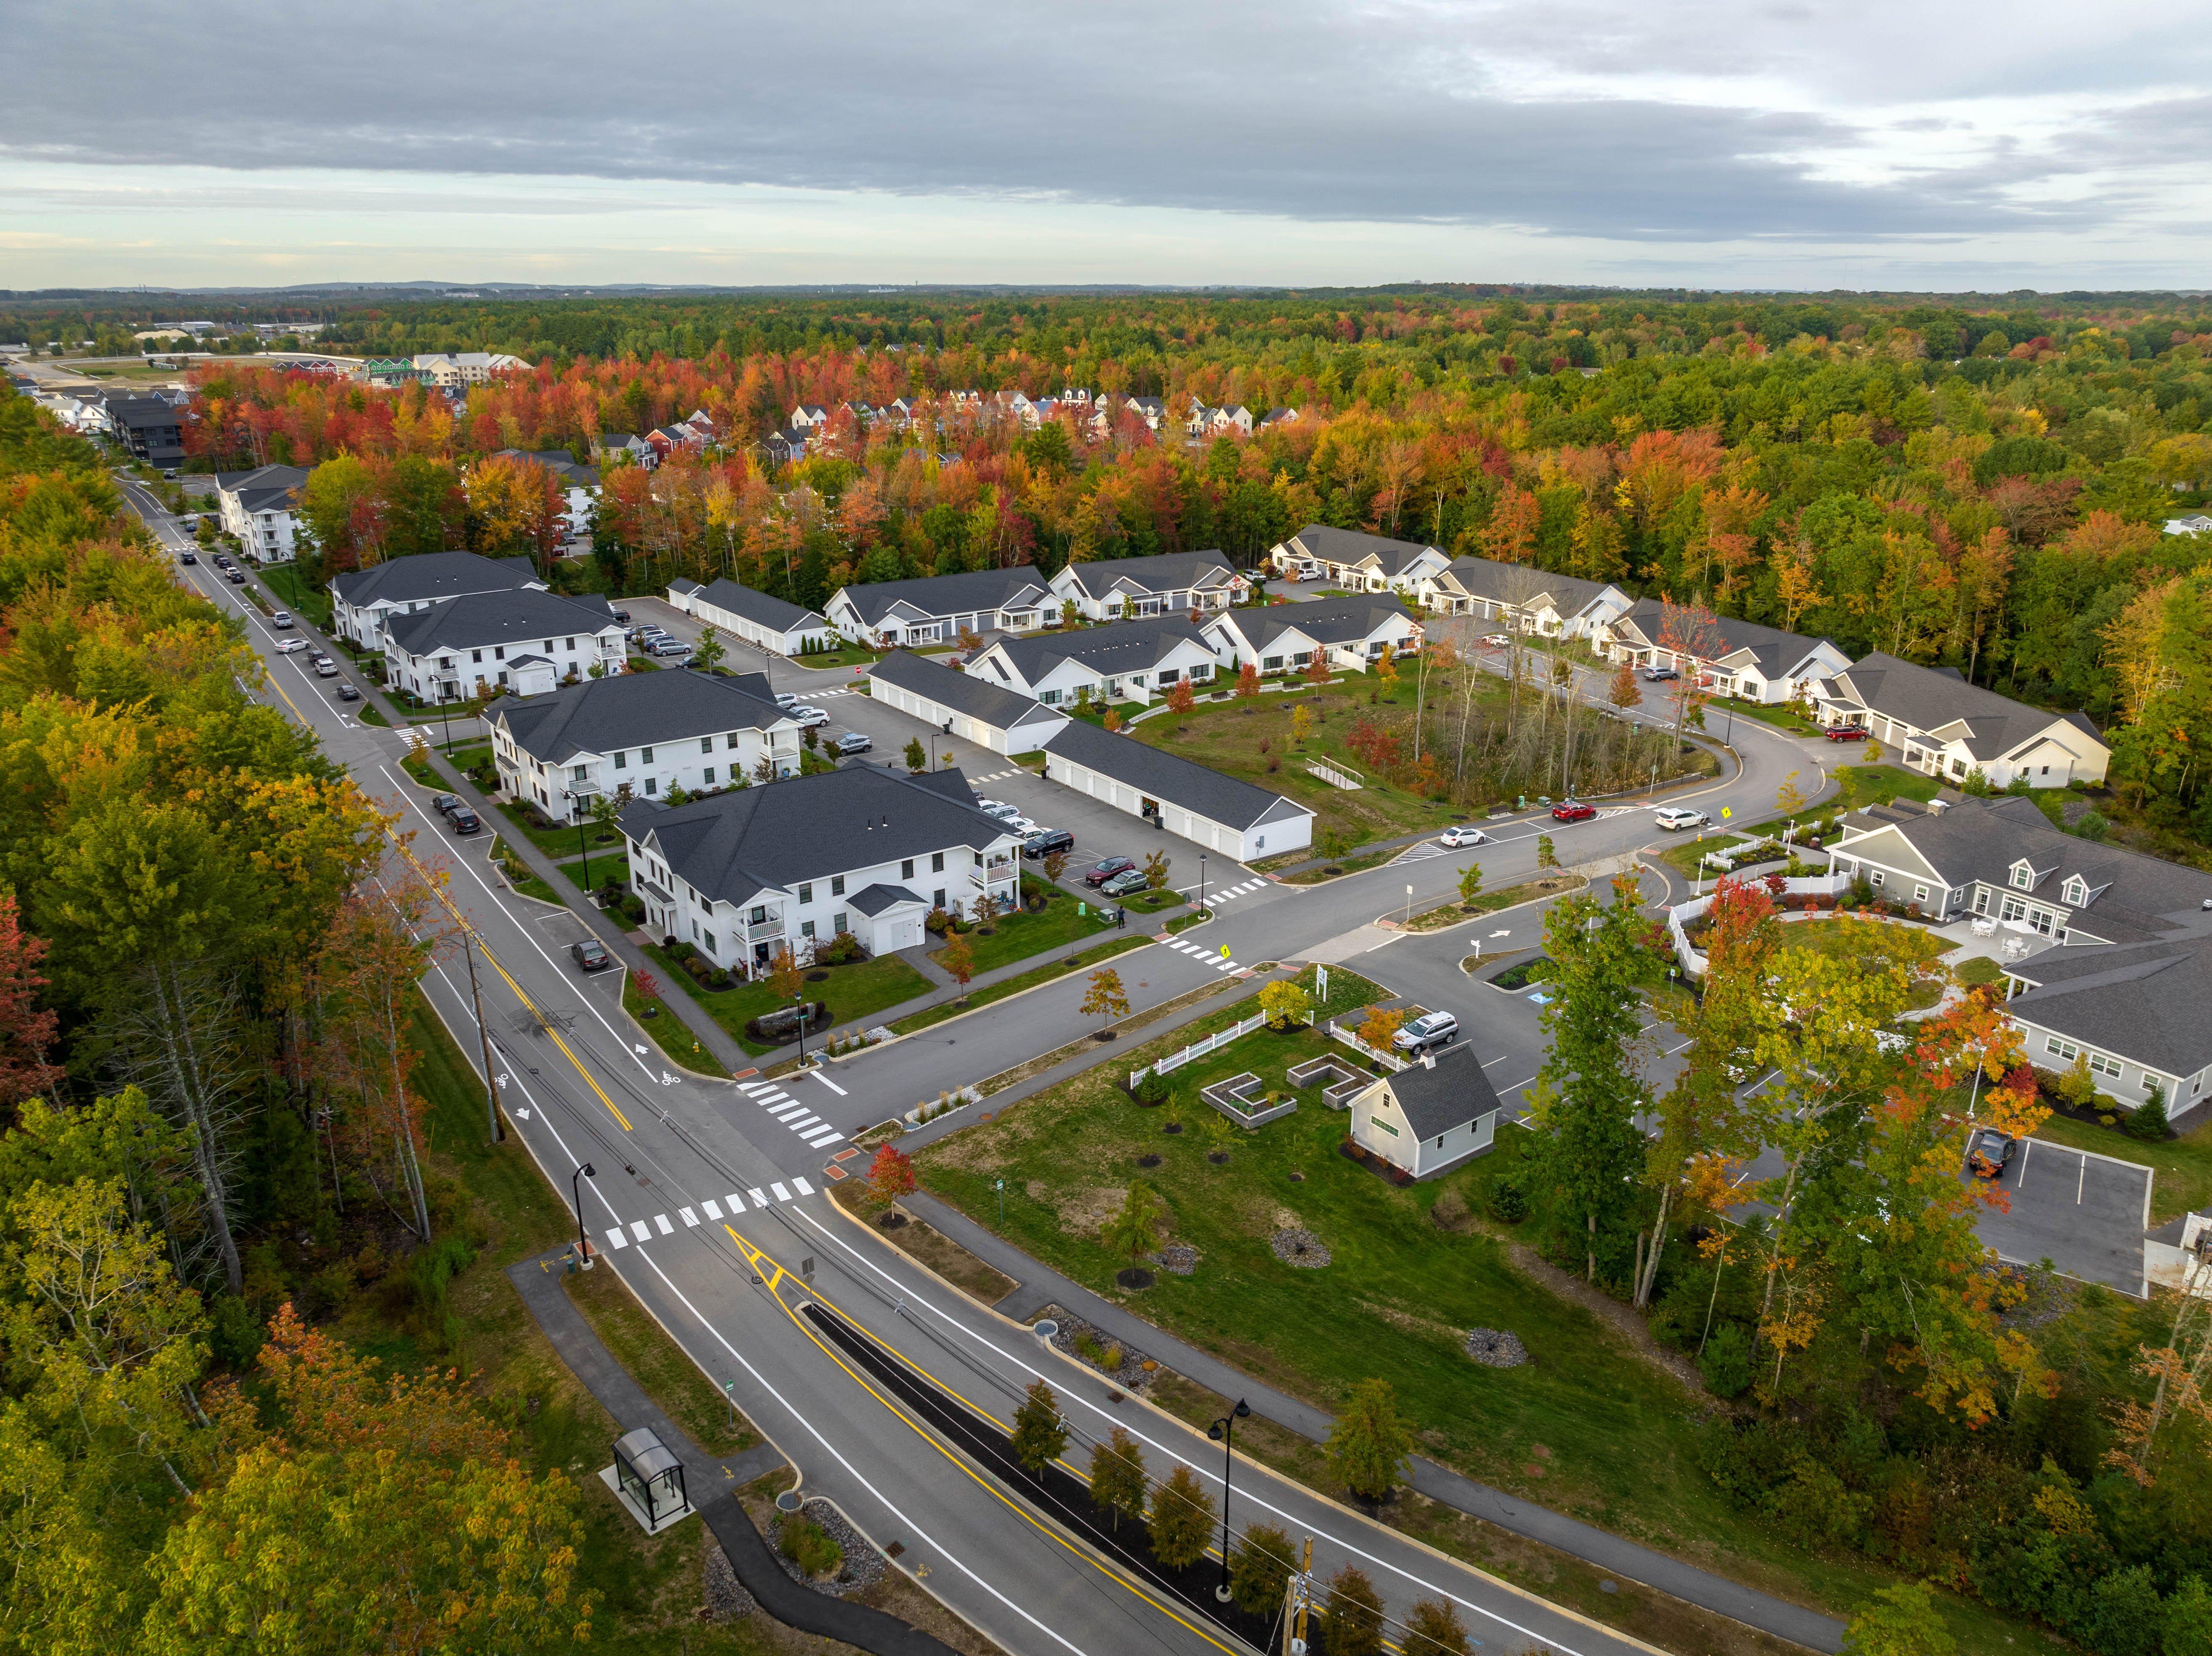 Drone view of a residential neighborhood with white homes and gray roofs, surrounded by trees.